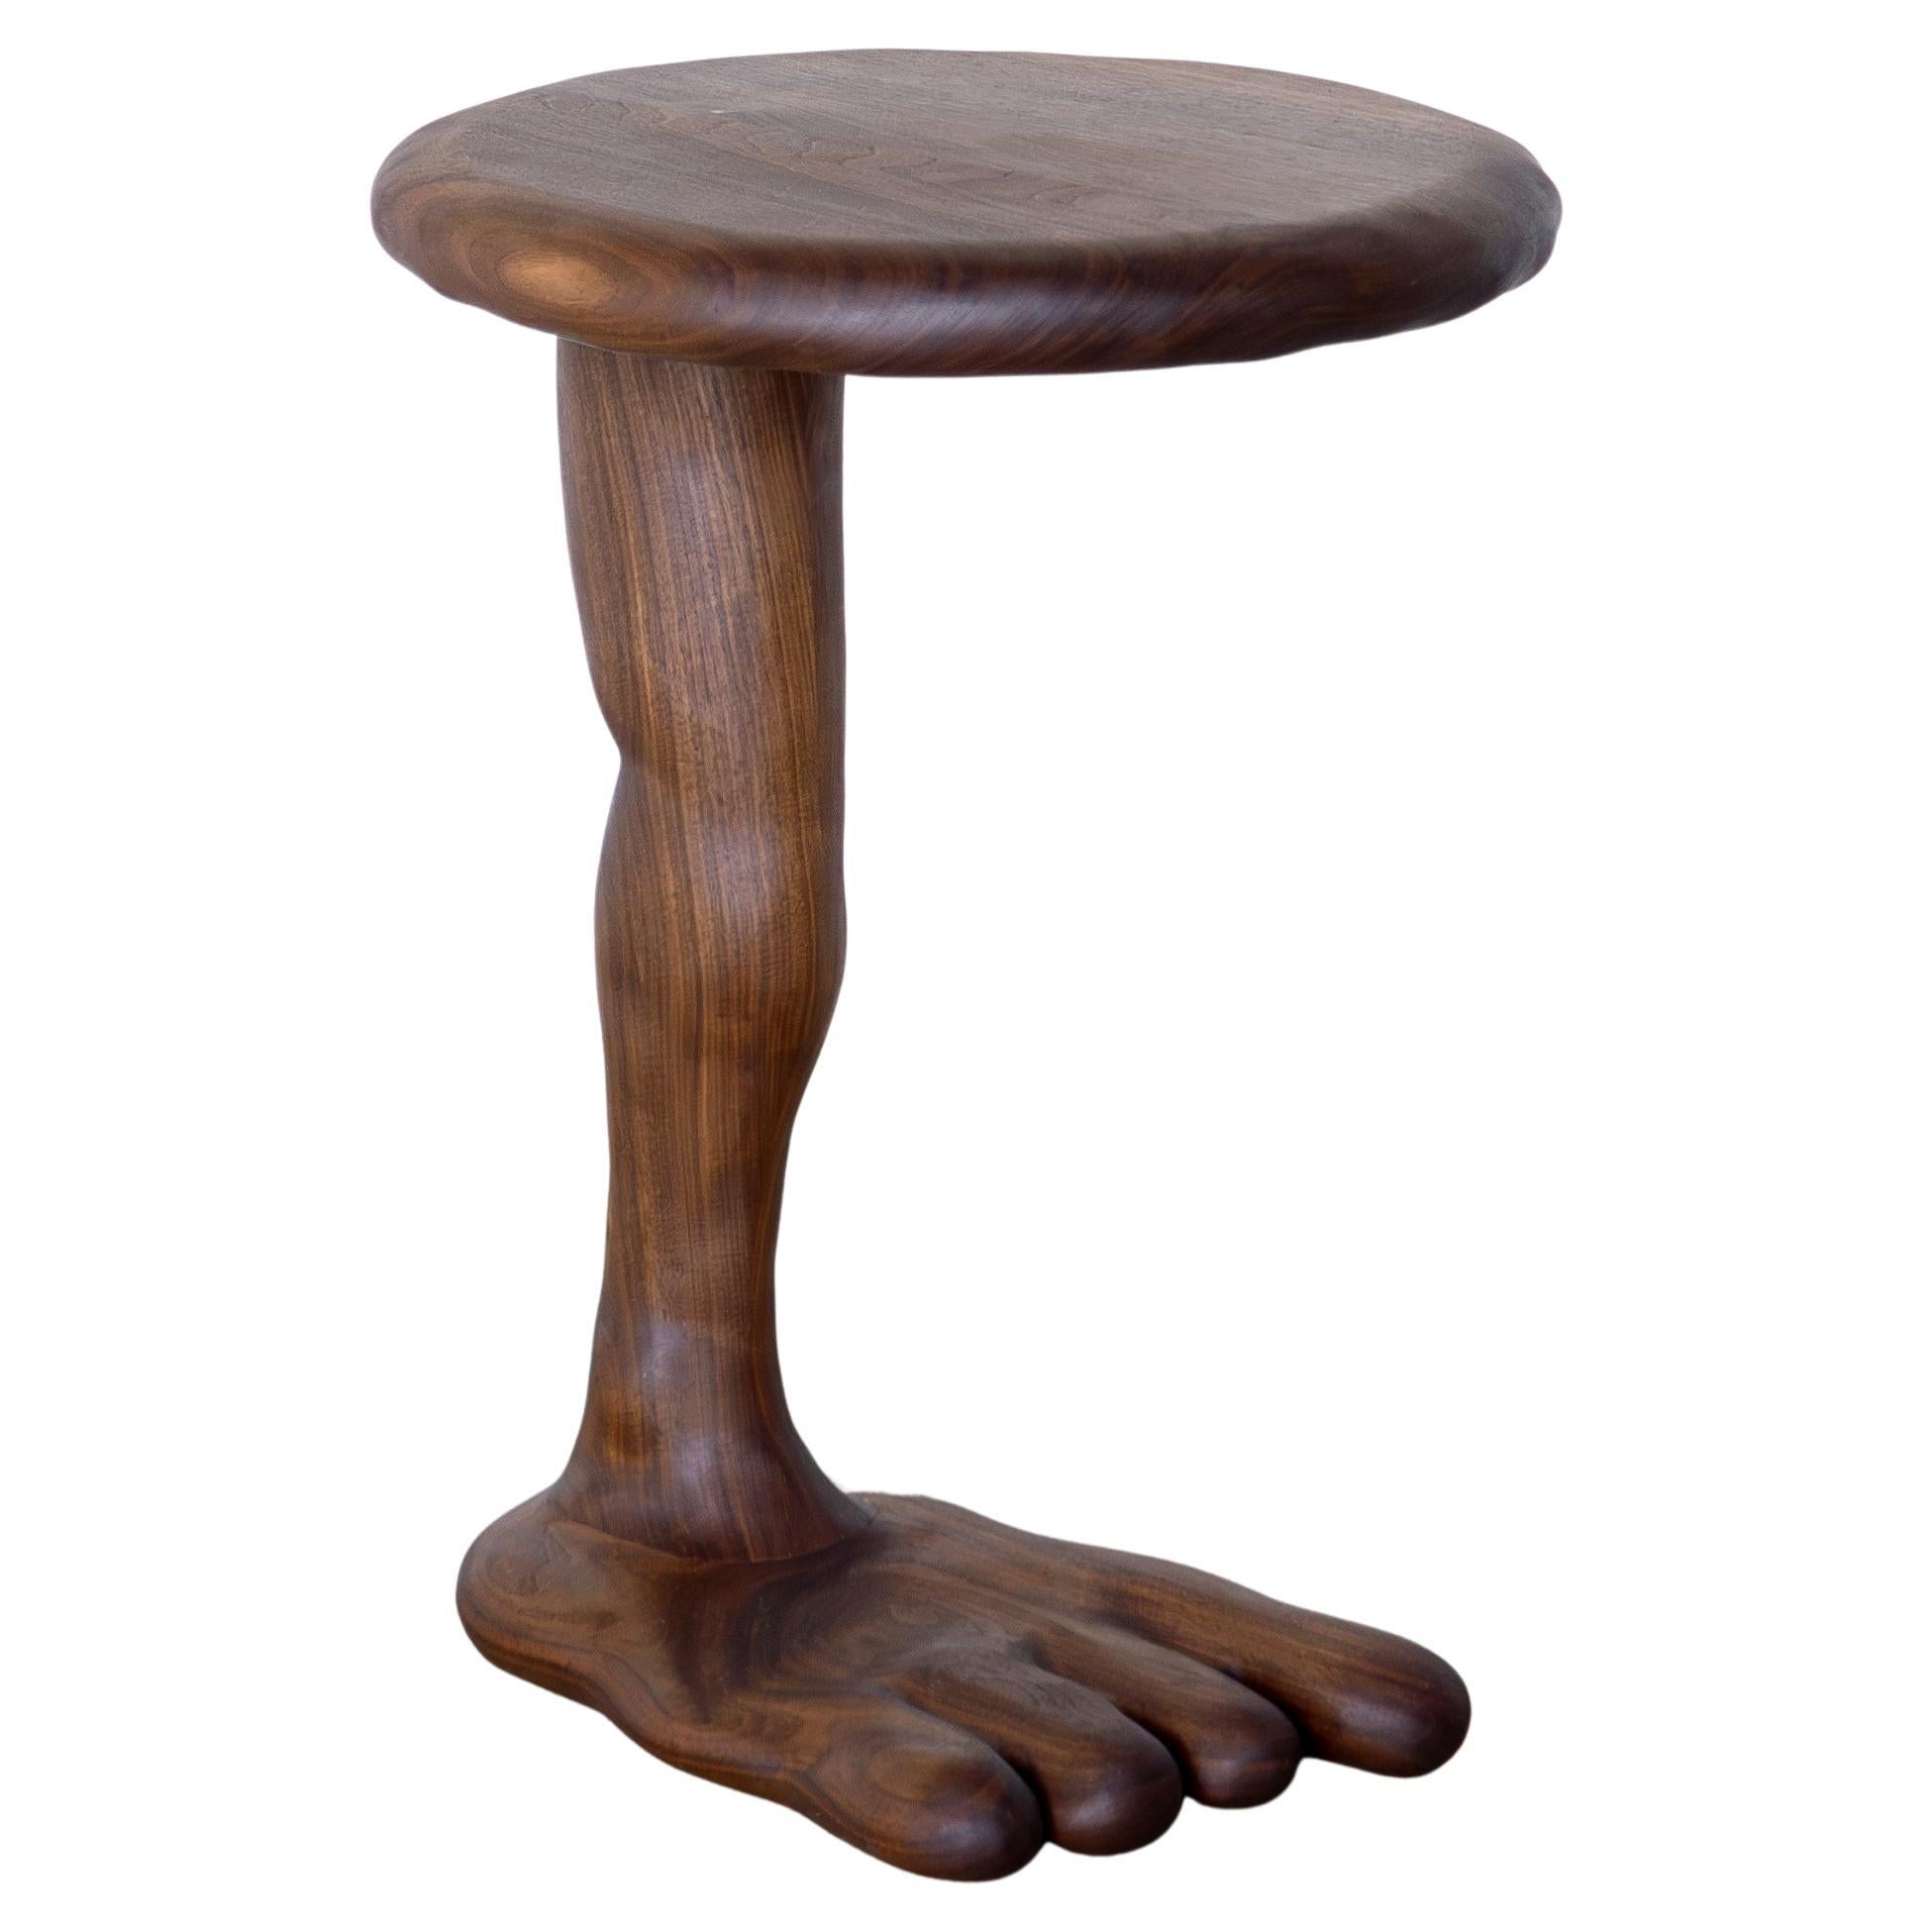 The Leg Side Table - Sculptural Table in Walnut Wood For Sale